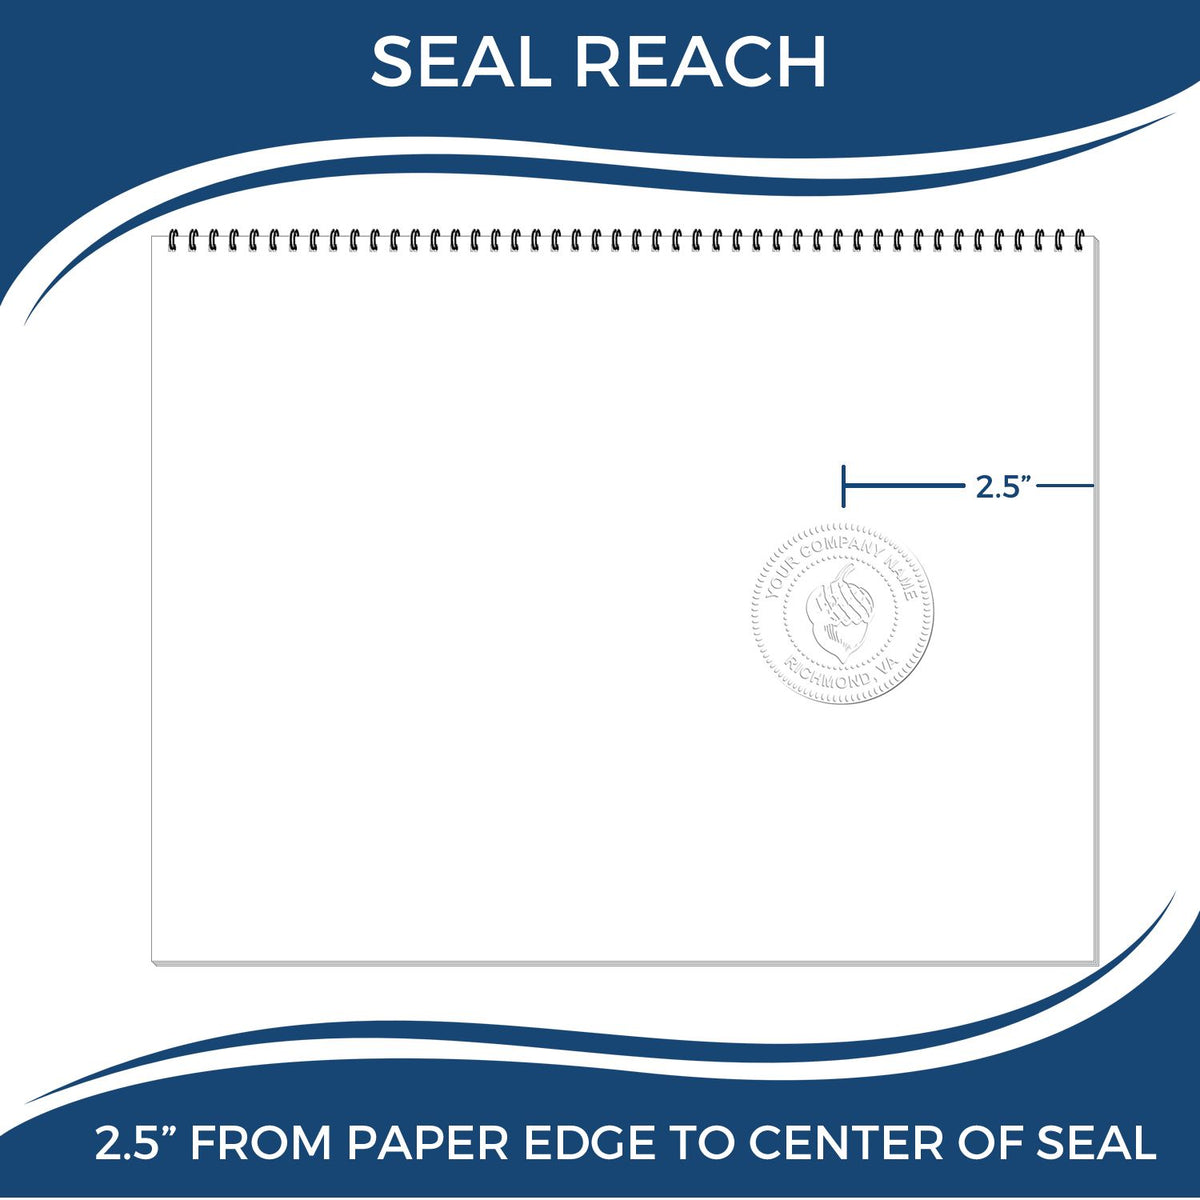 An infographic showing the seal reach which is represented by a ruler and a miniature seal image of the Long Reach Indiana PE Seal